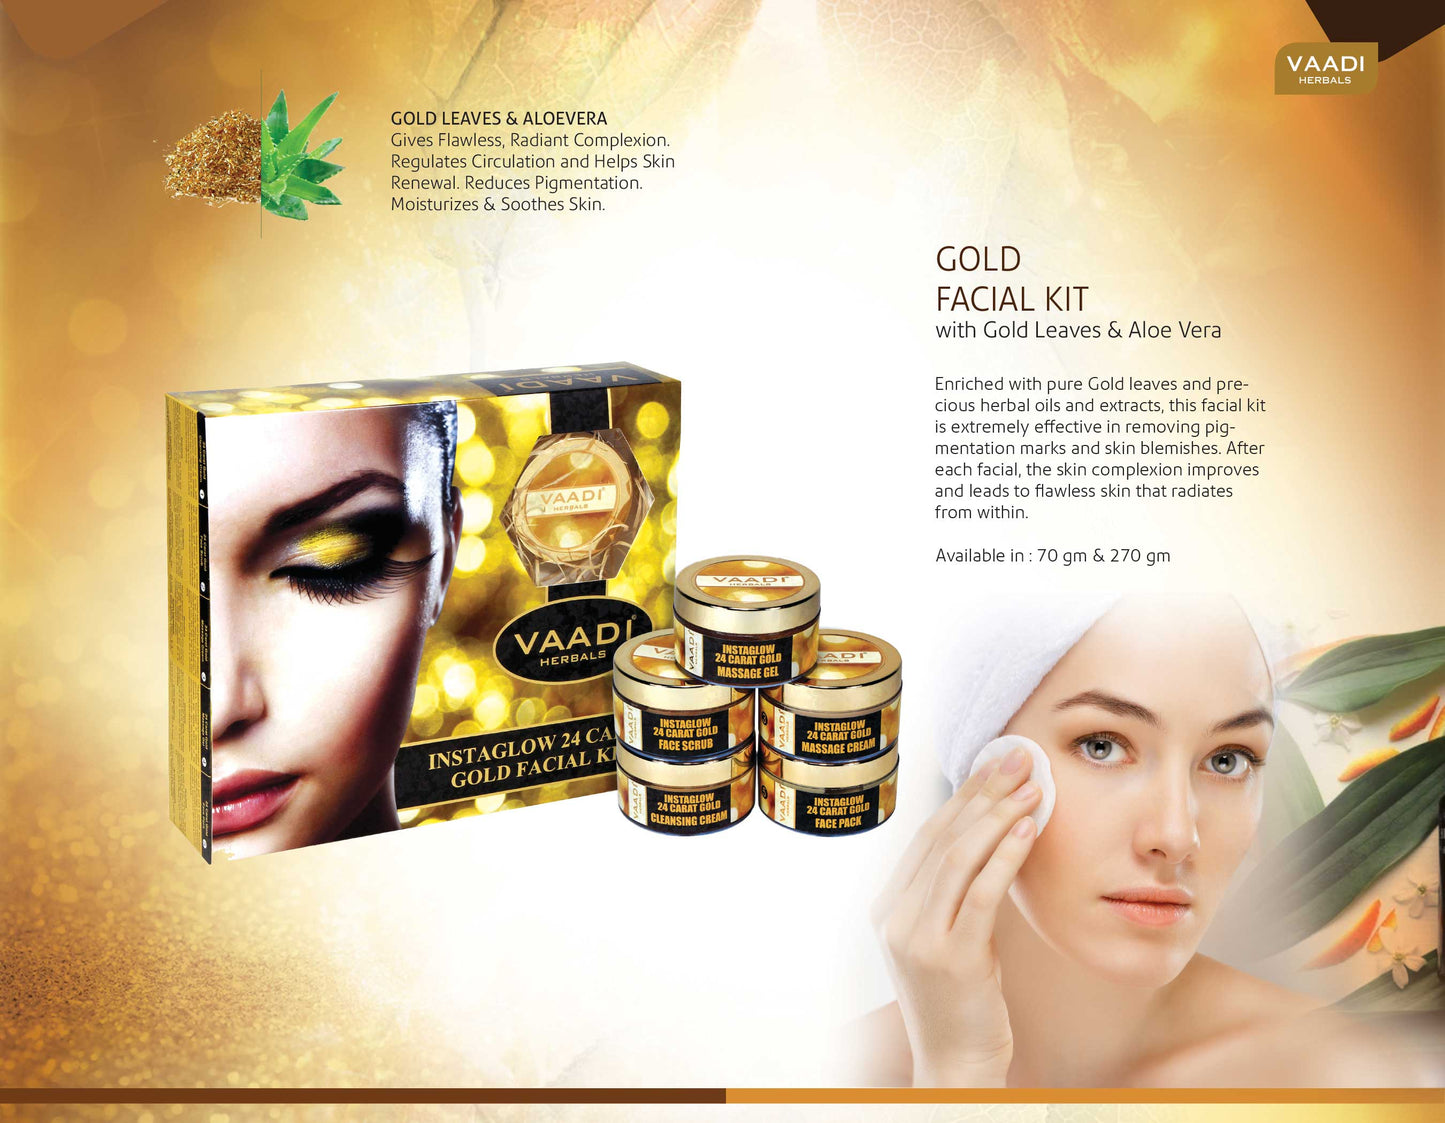 Organic 24 Carat Gold Facial Kit with Gold Leaves, Marigold & Wheatgerm Oil, Lemon Peel - Brightens Skin and Gives Glow (270 gms/9.6 oz)